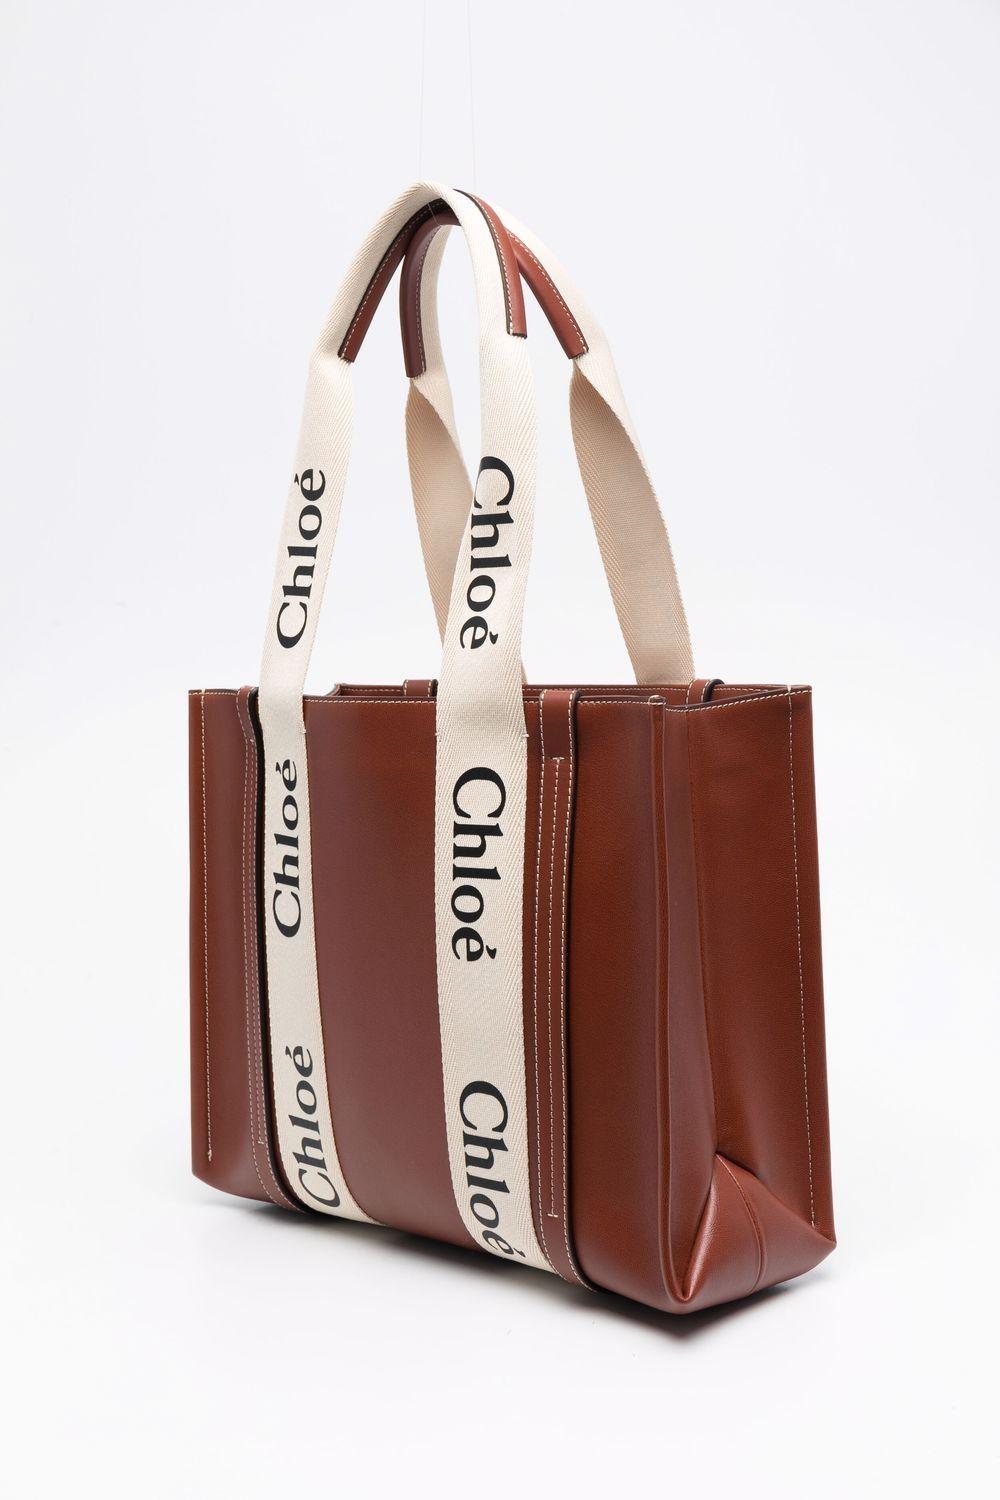 Chloé Marcie Small Leather Tote Bag In Brown